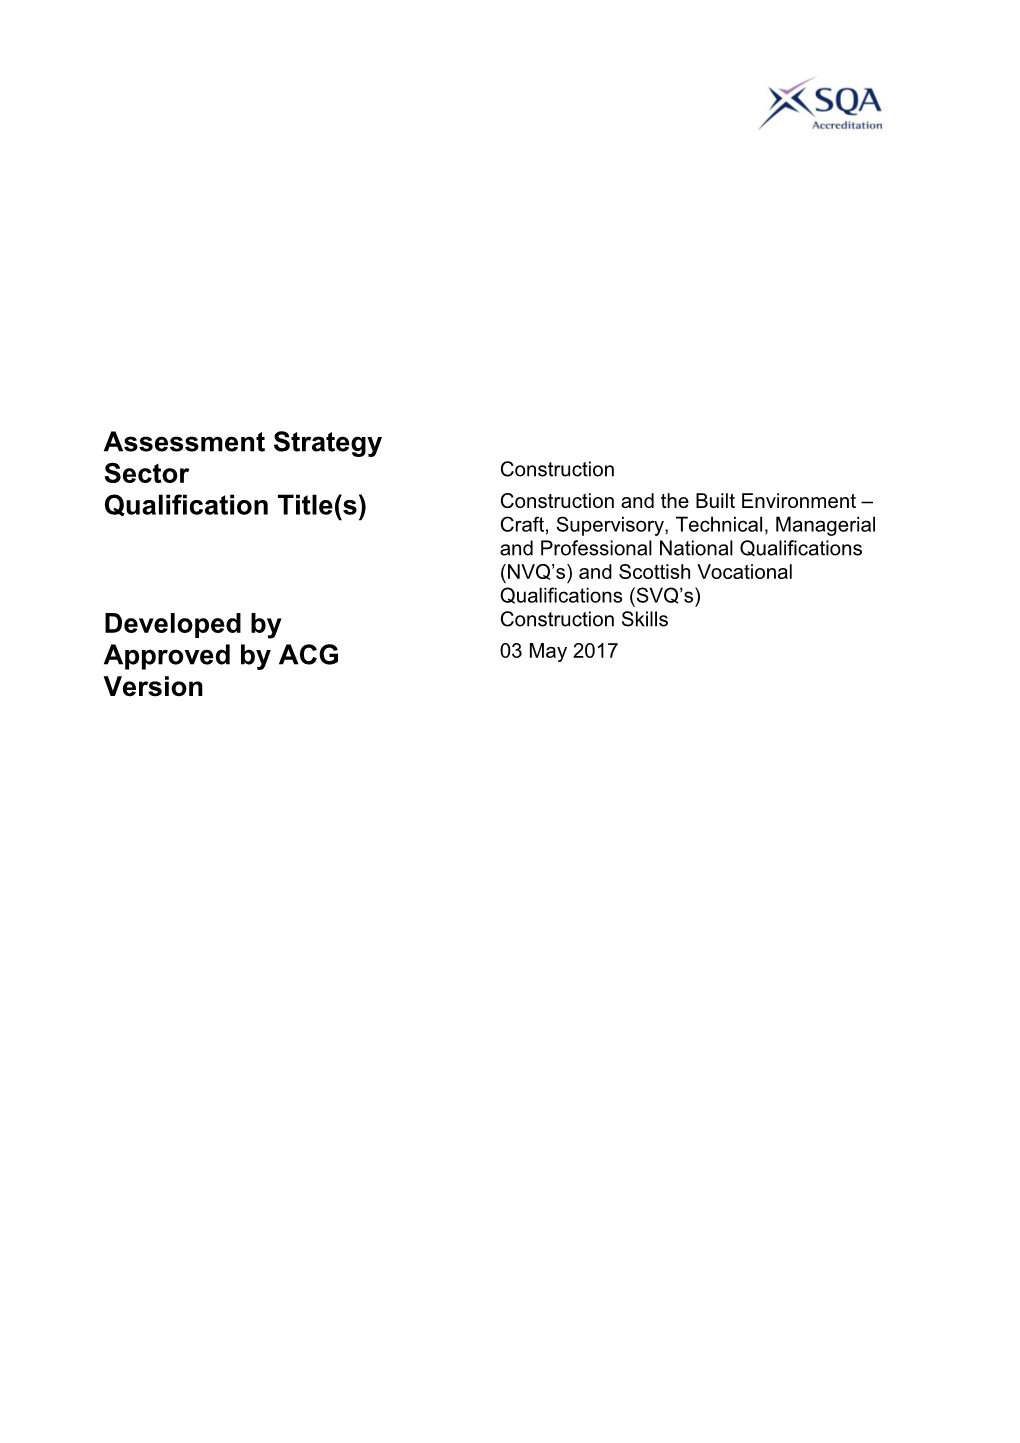 Consolidated Assessment Strategy for Construction and the Built Environment Craft, Supervisory